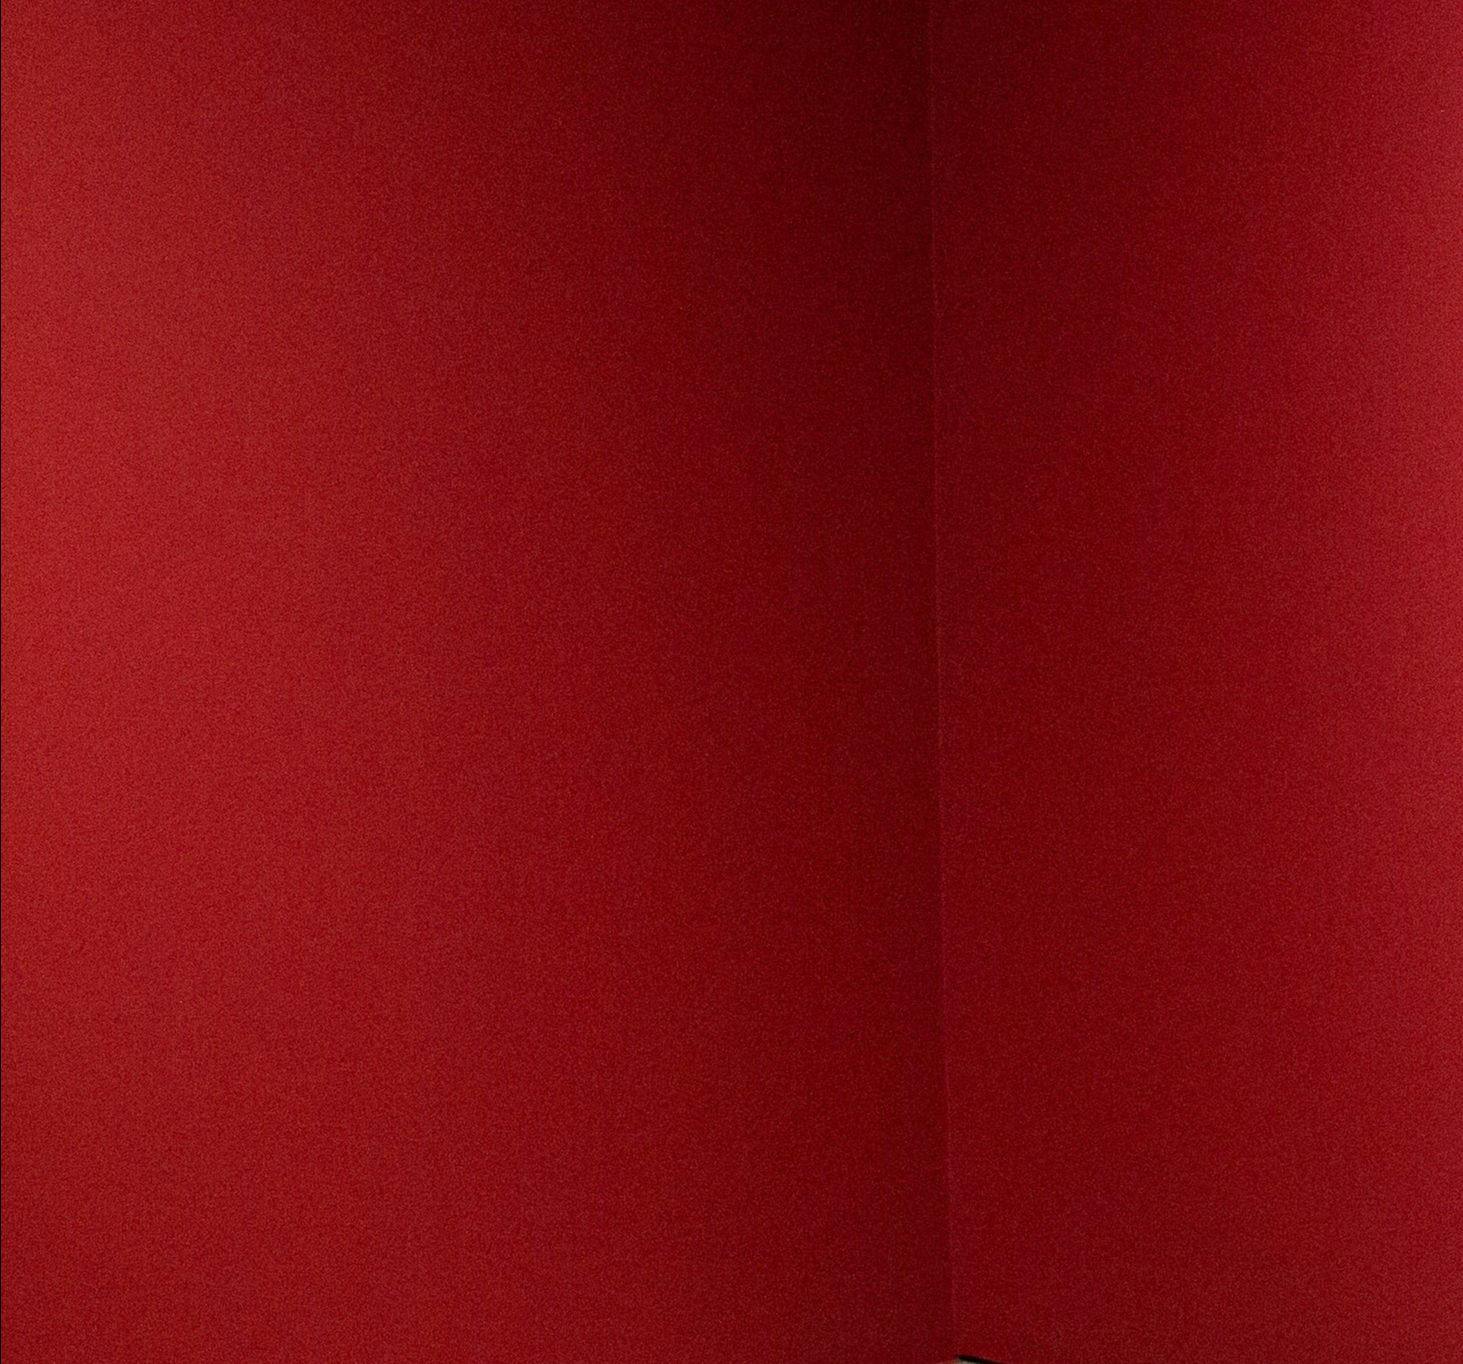 Red wall in the exhibition